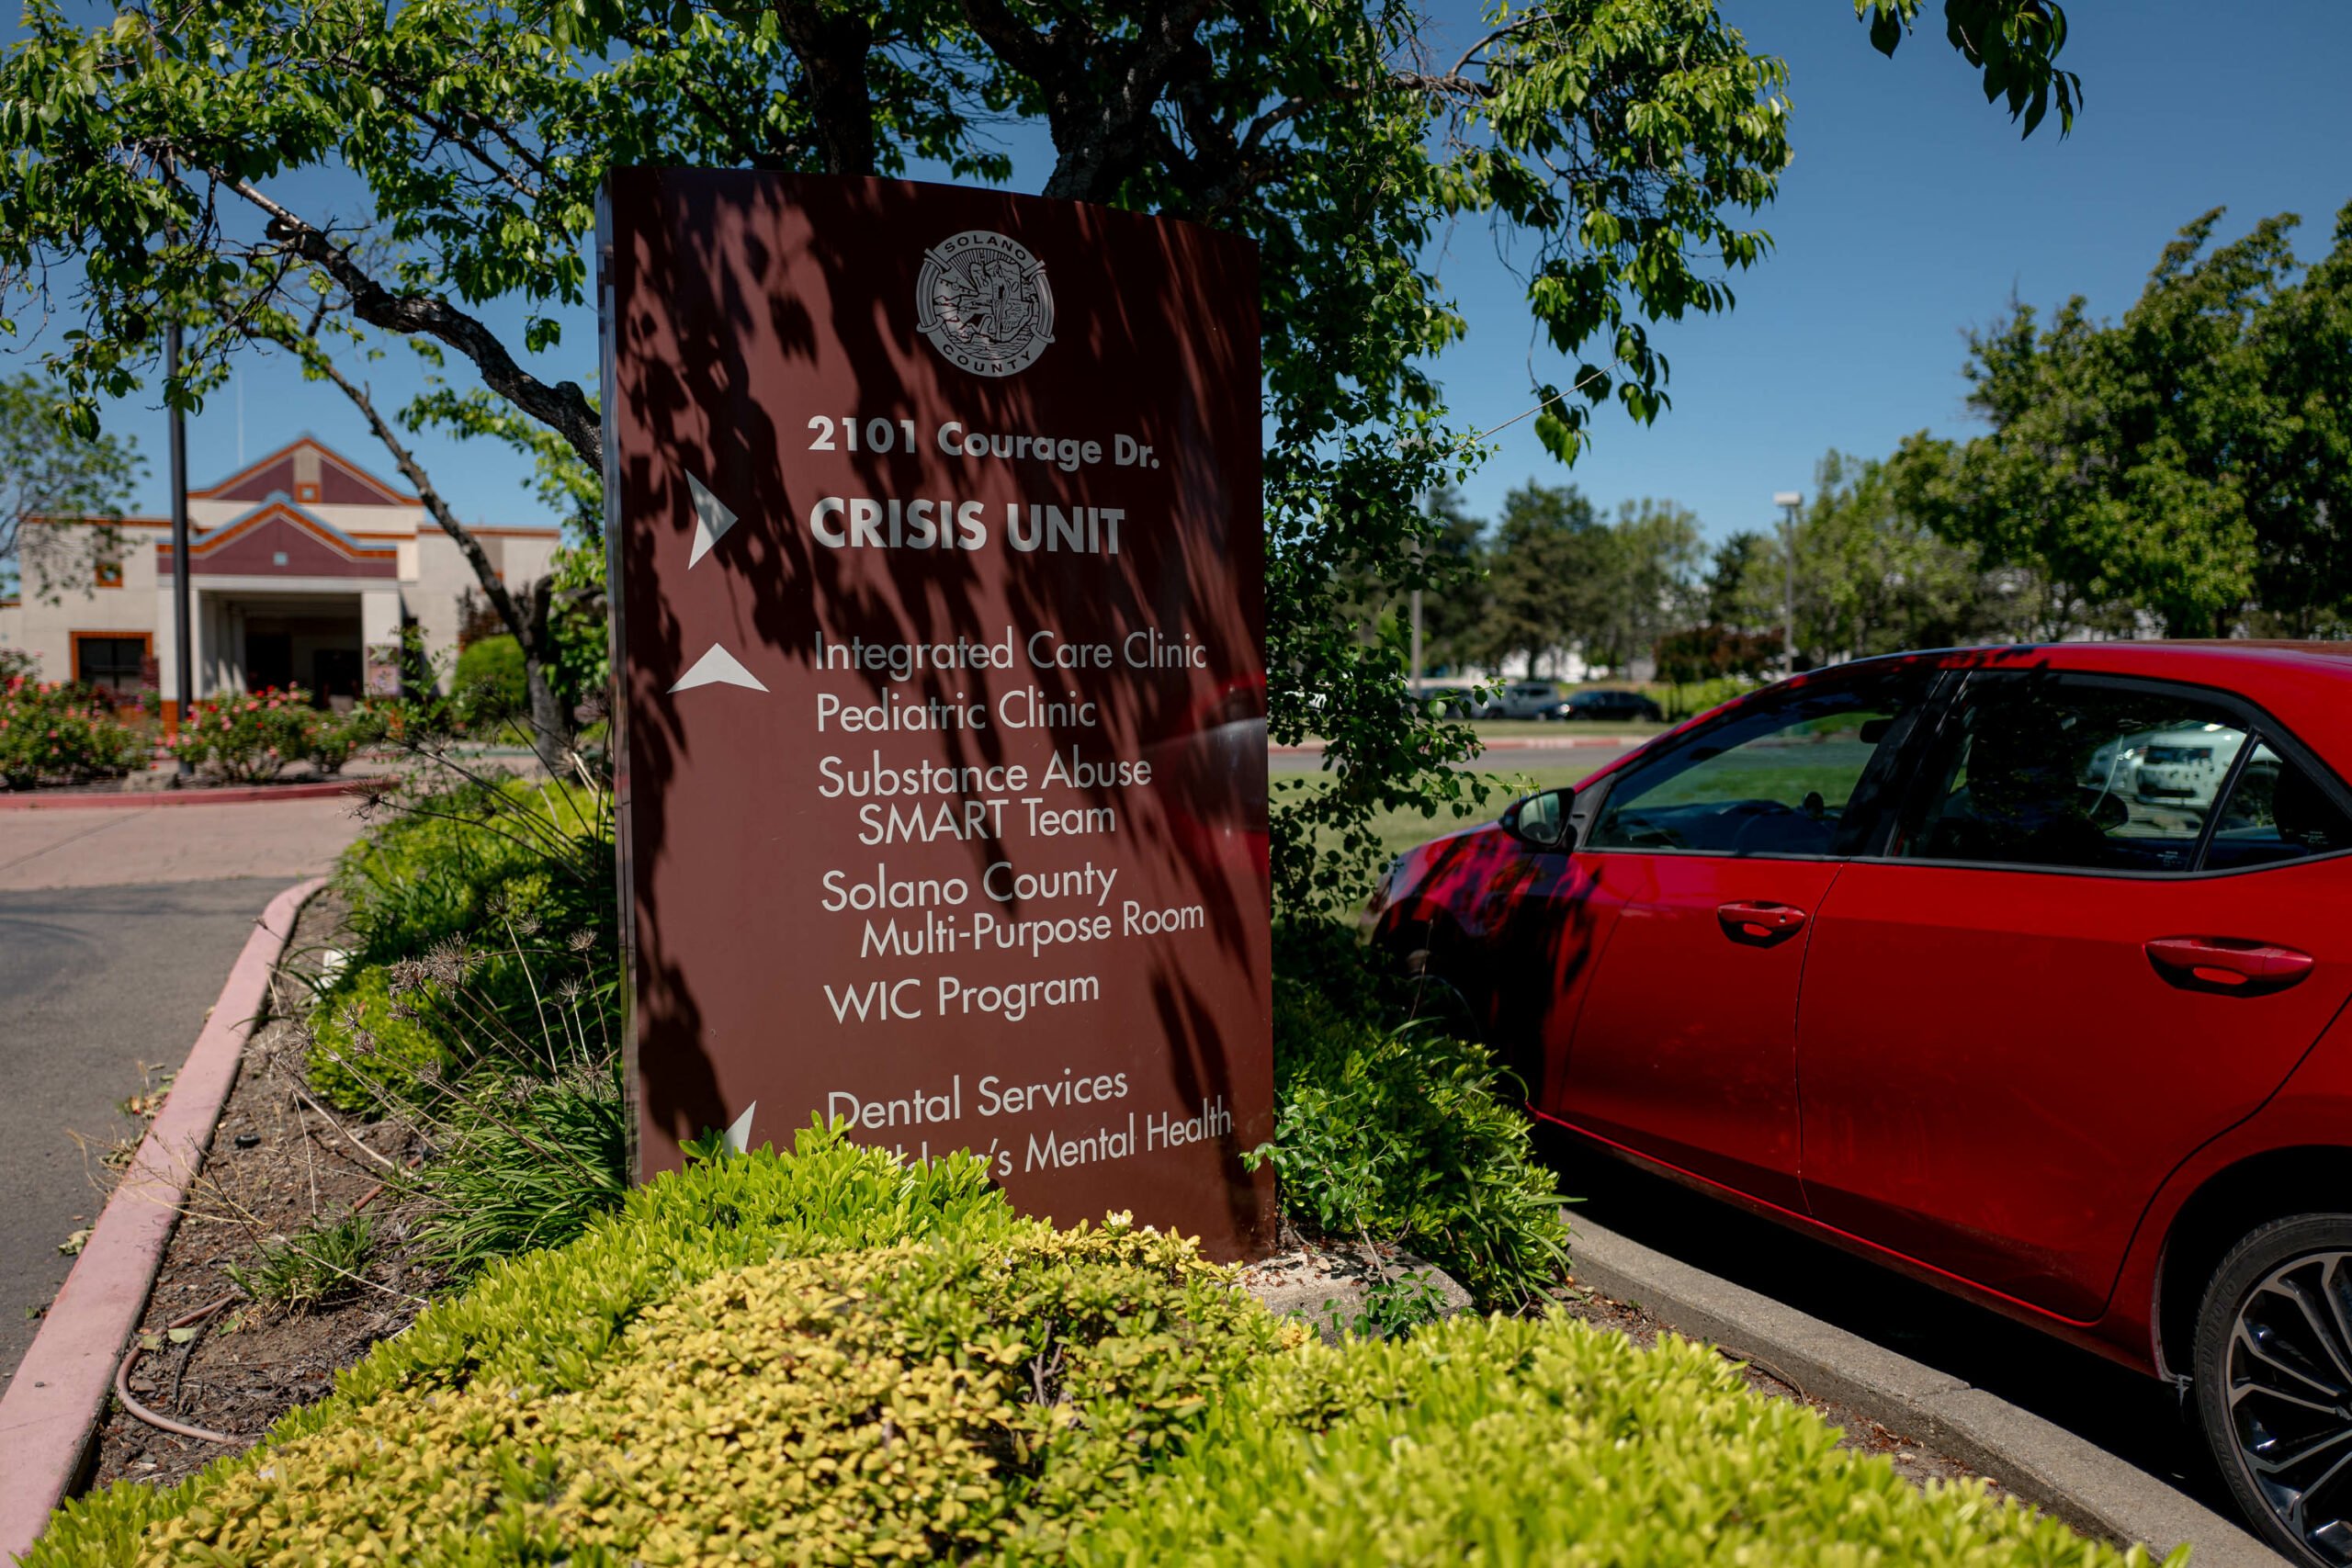 An outdoor view of a healthcare facility's entrance sign, labeled 'CRISIS UNIT' at 2101 Courage Dr. The sign lists various services such as Integrated Care Clinic, Pediatric Clinic, Substance Abuse, SMART Team, and more. The backdrop includes a modern building, lush greenery, and a parked red car, set under a clear blue sky.